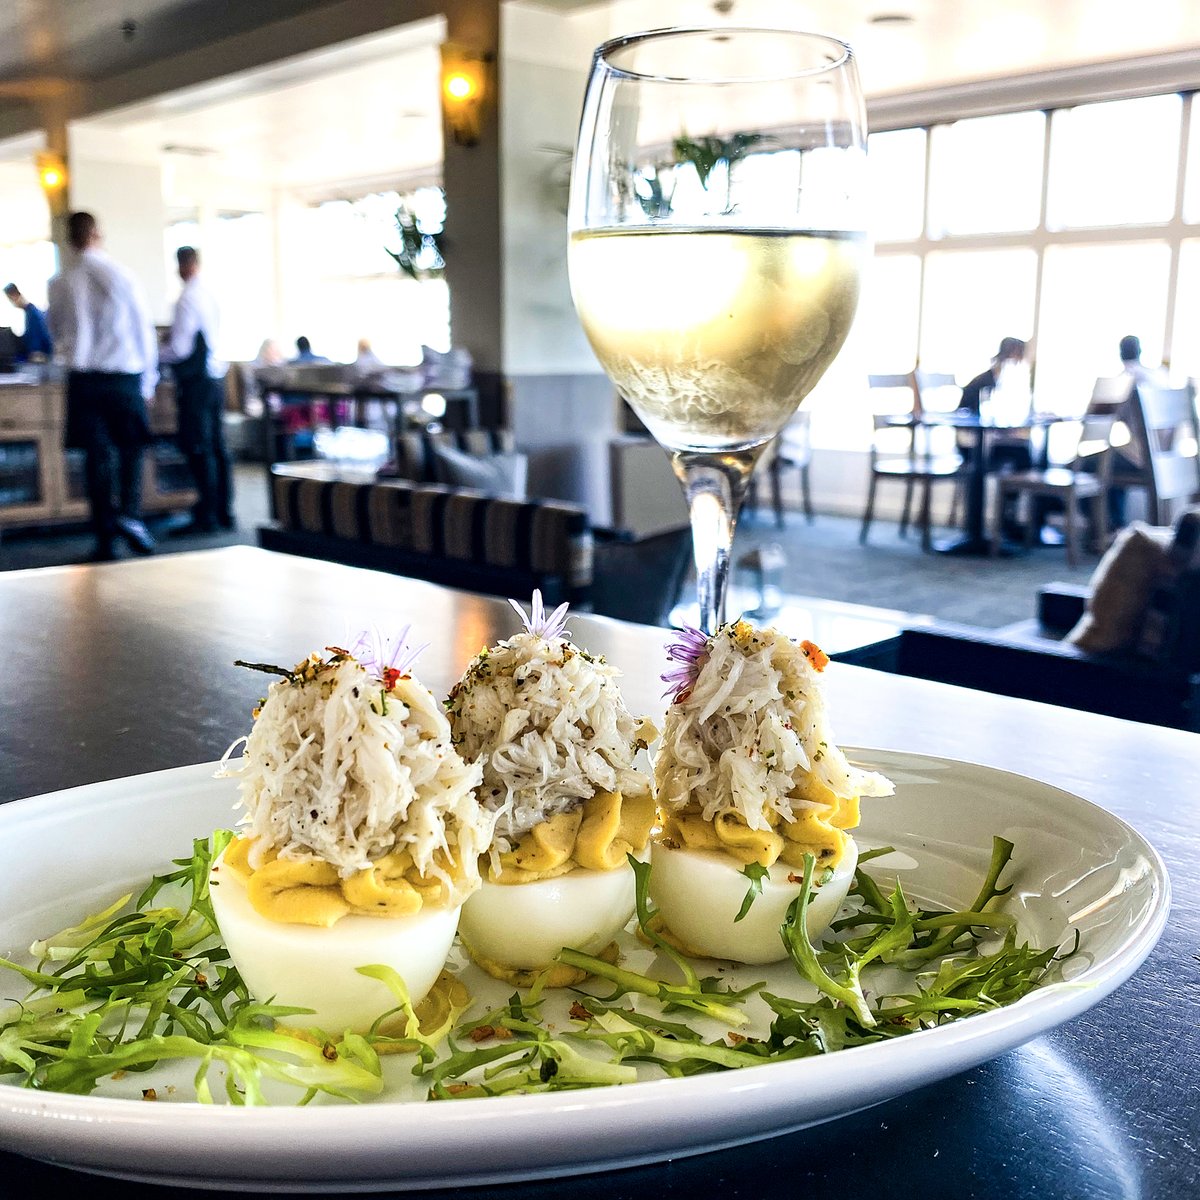 Seafood Deviled Eggs, a glass of white and a 180º view of the Pacific. 
Sit back, relax and enjoy. Happy weekend everyone. 

#sf #sffoodie #sffoodies #bayarea #bayareafoodies #bayareaeats #dothebay #7x7bayarea #bayareabuzz #sfbayarea #sanfrancisco